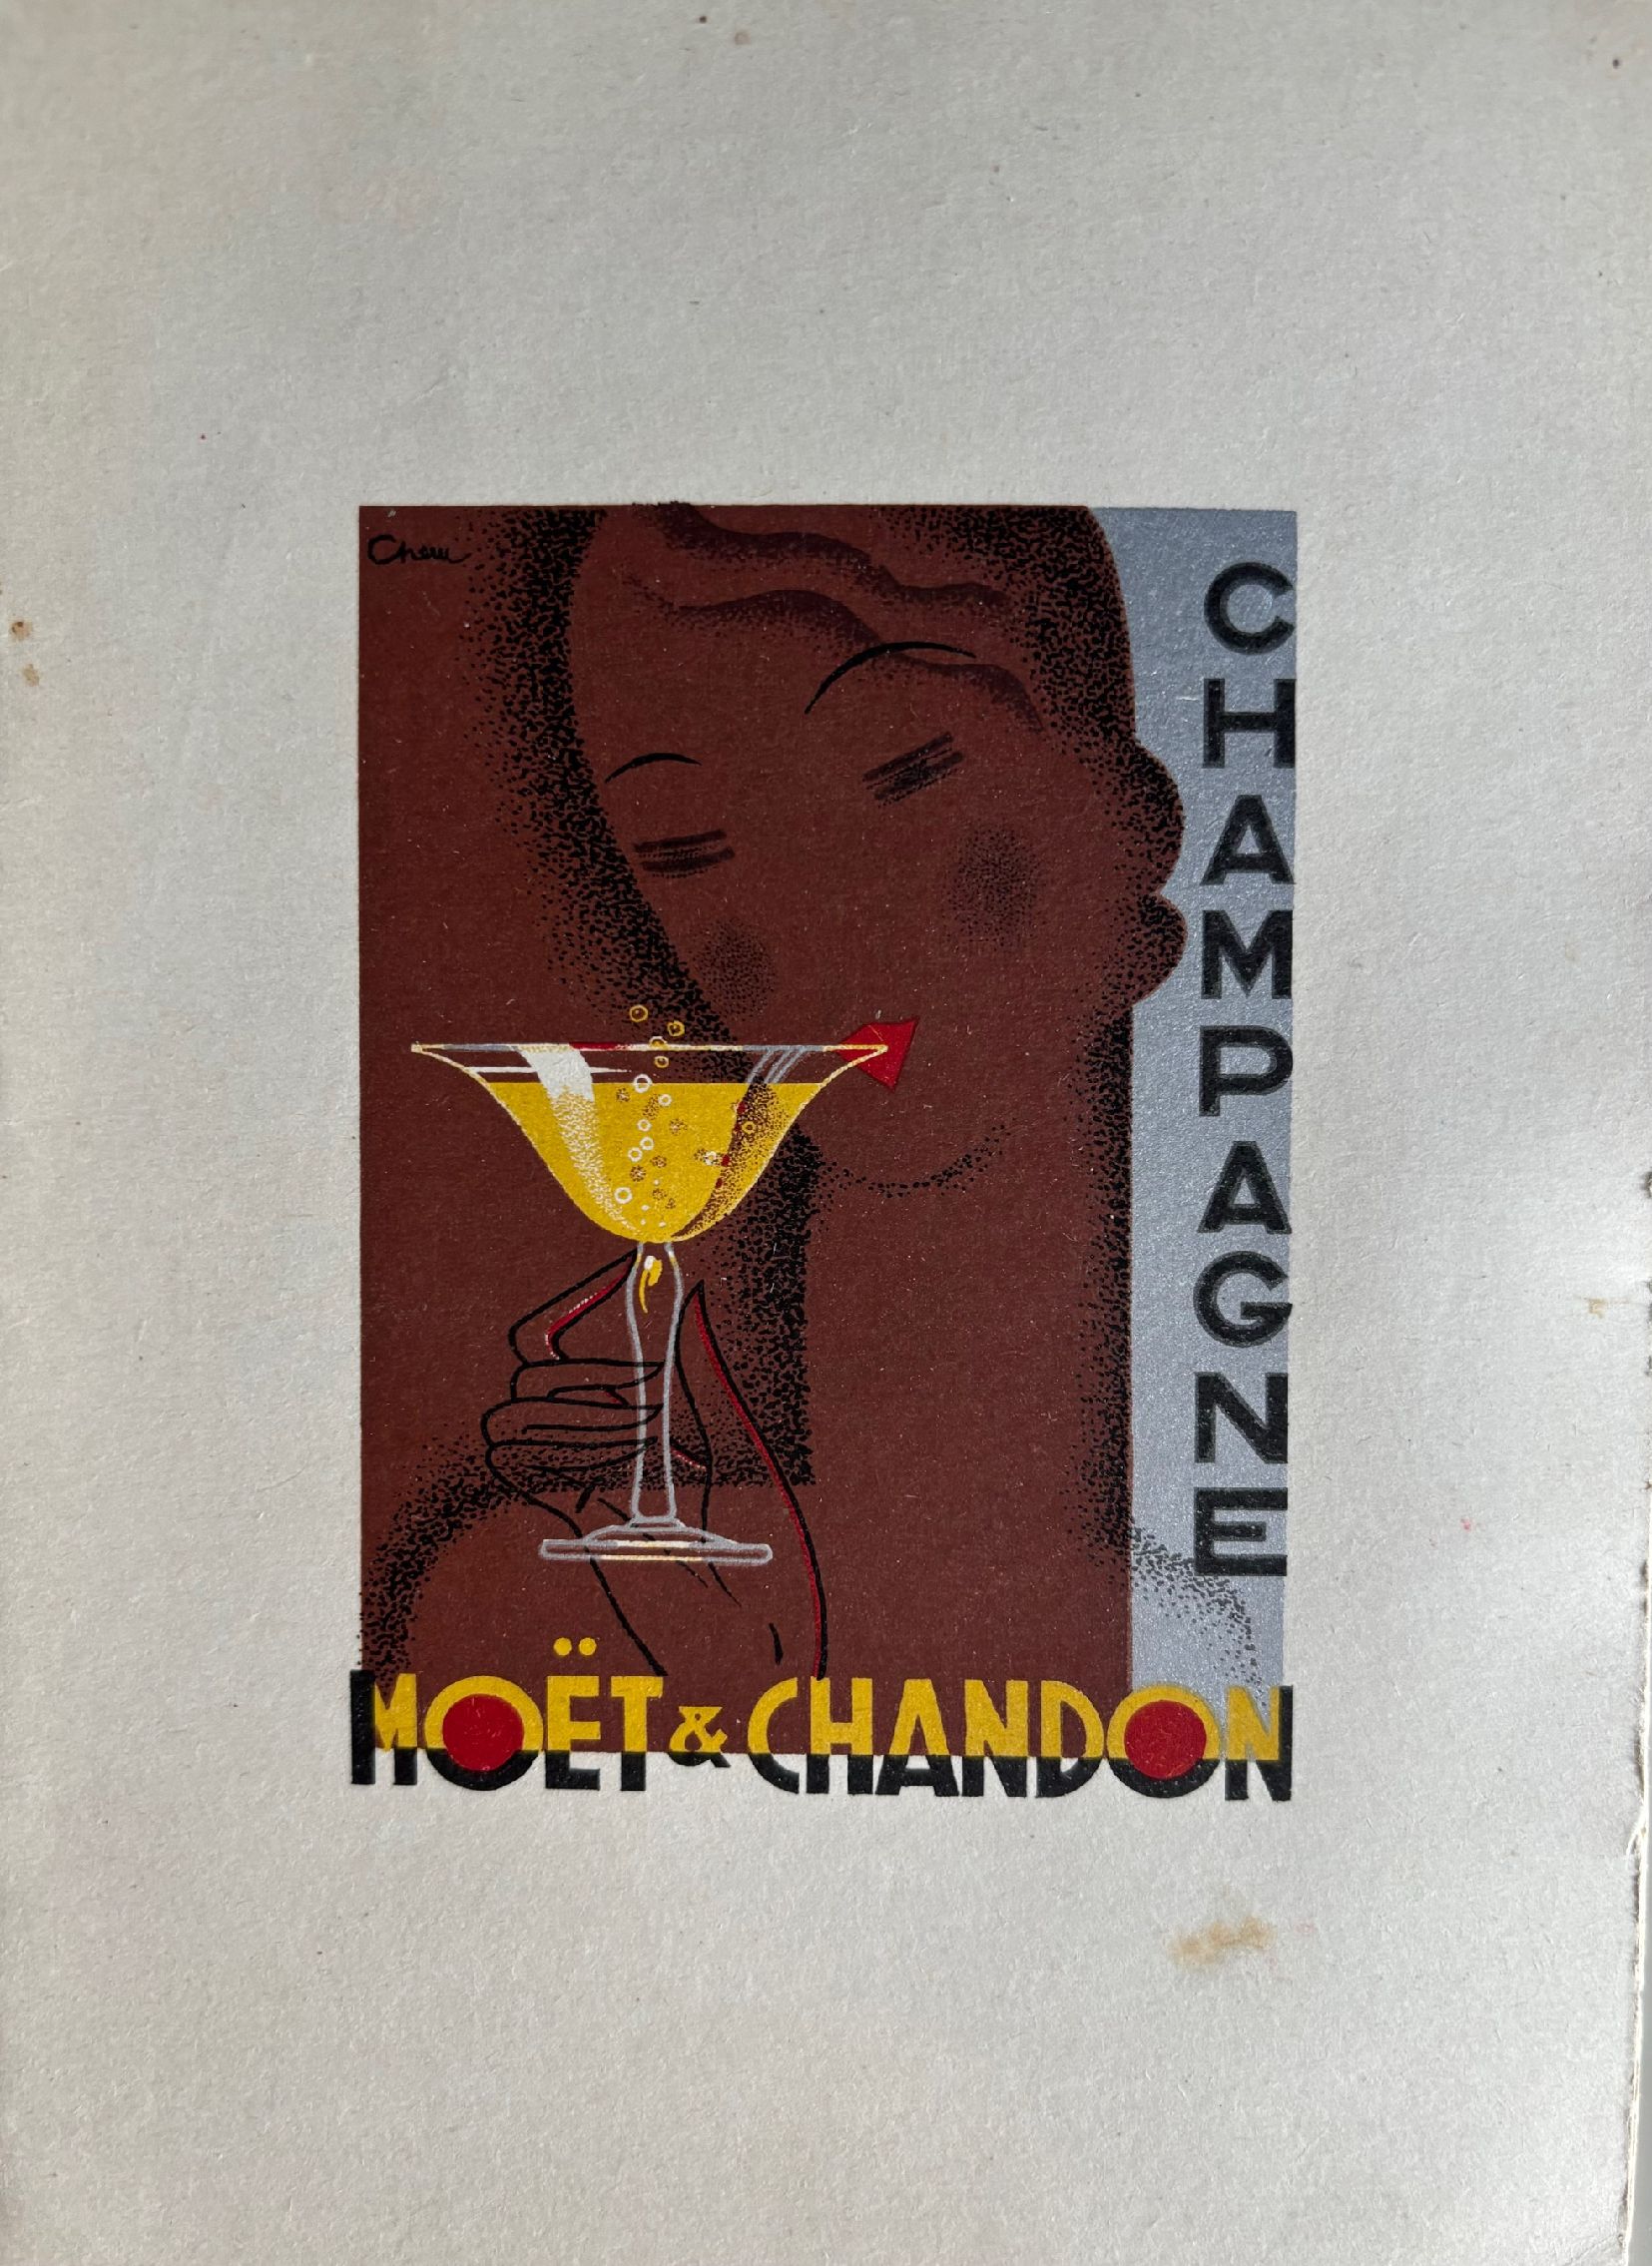 *NEW ARRIVAL* Champagne Moet & Chandon